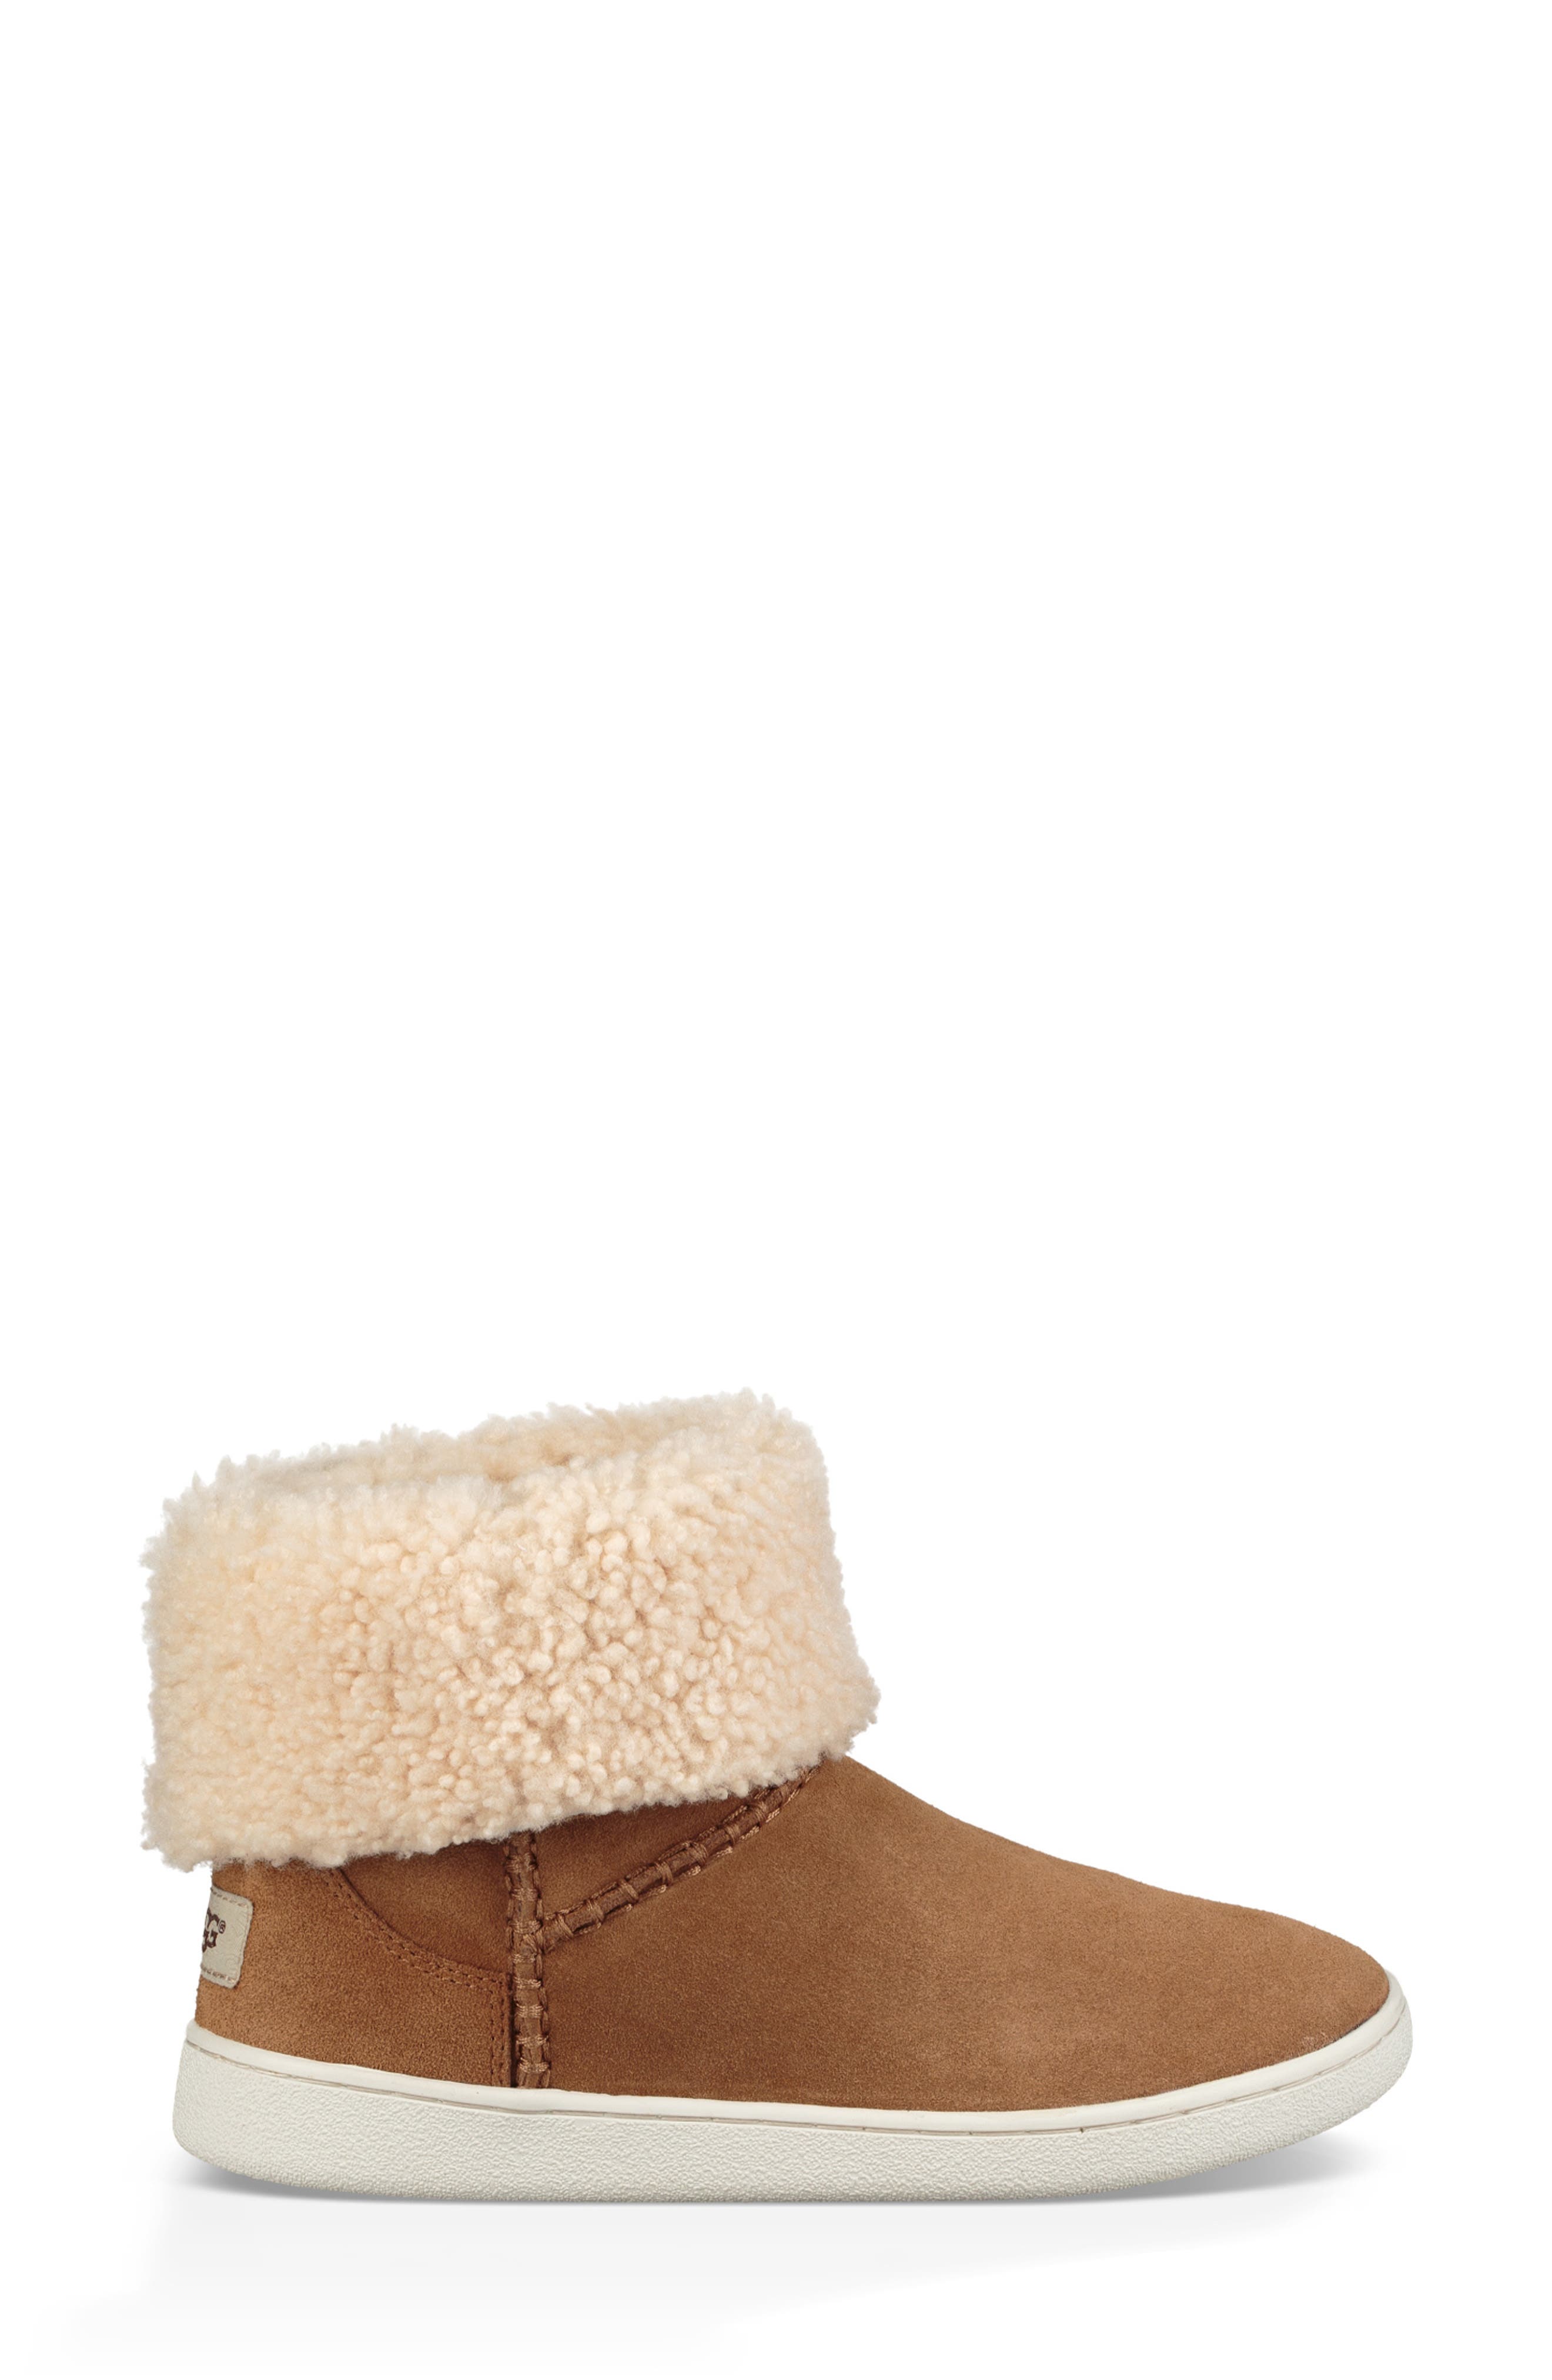 ugg mika sneaker boots